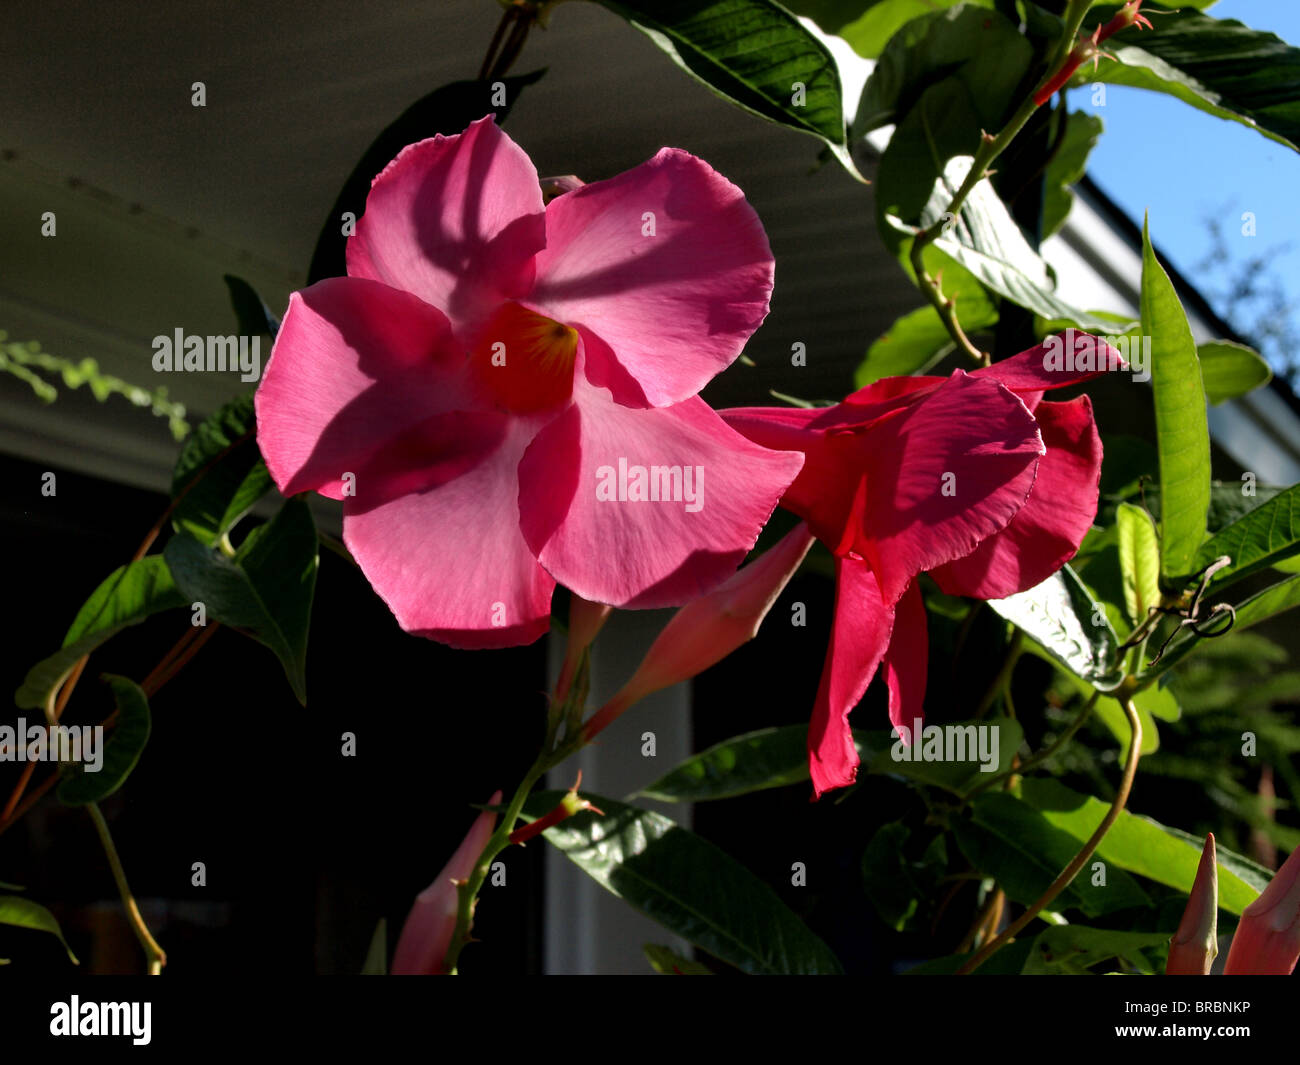 pink red flowers 'alice dupont' mandevilla climbing vine plant flower garden potted Stock Photo